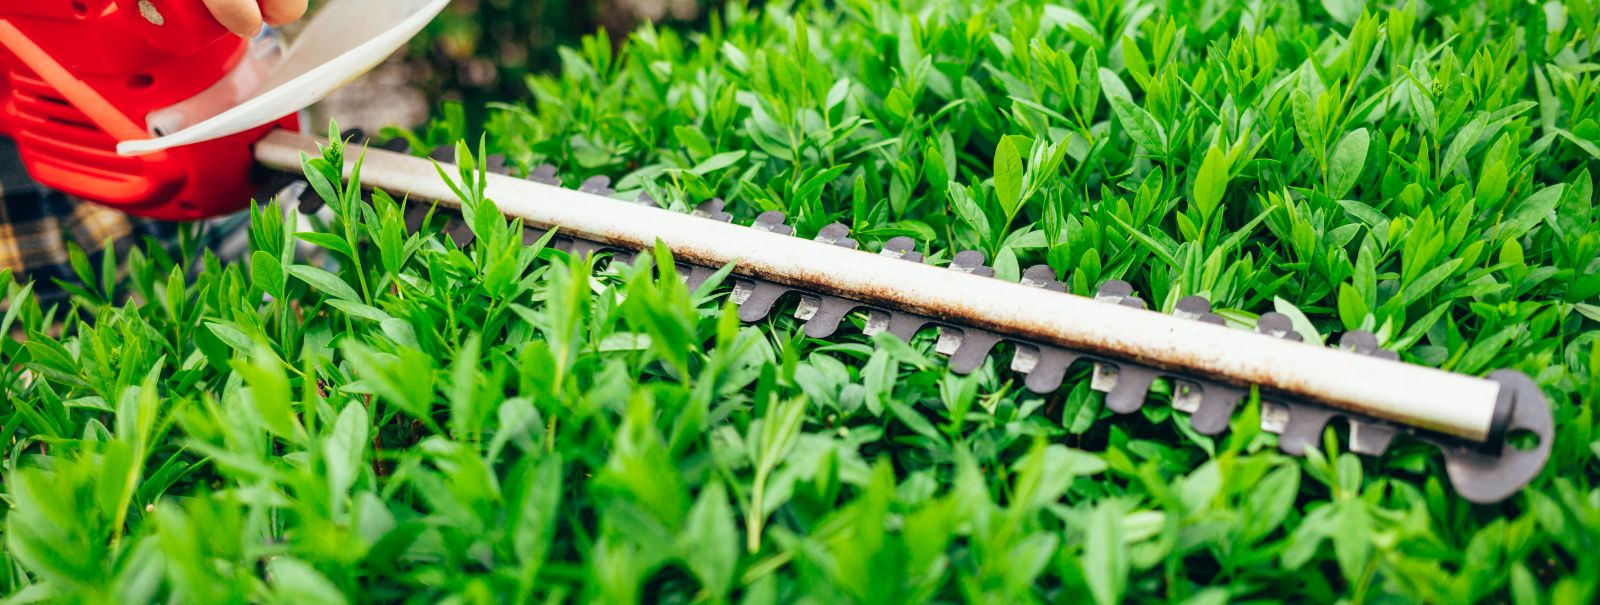 Seasonal shrub cutting is a critical component of garden maintenance that ensures the health and beauty of your outdoor space. It involves the selective removal